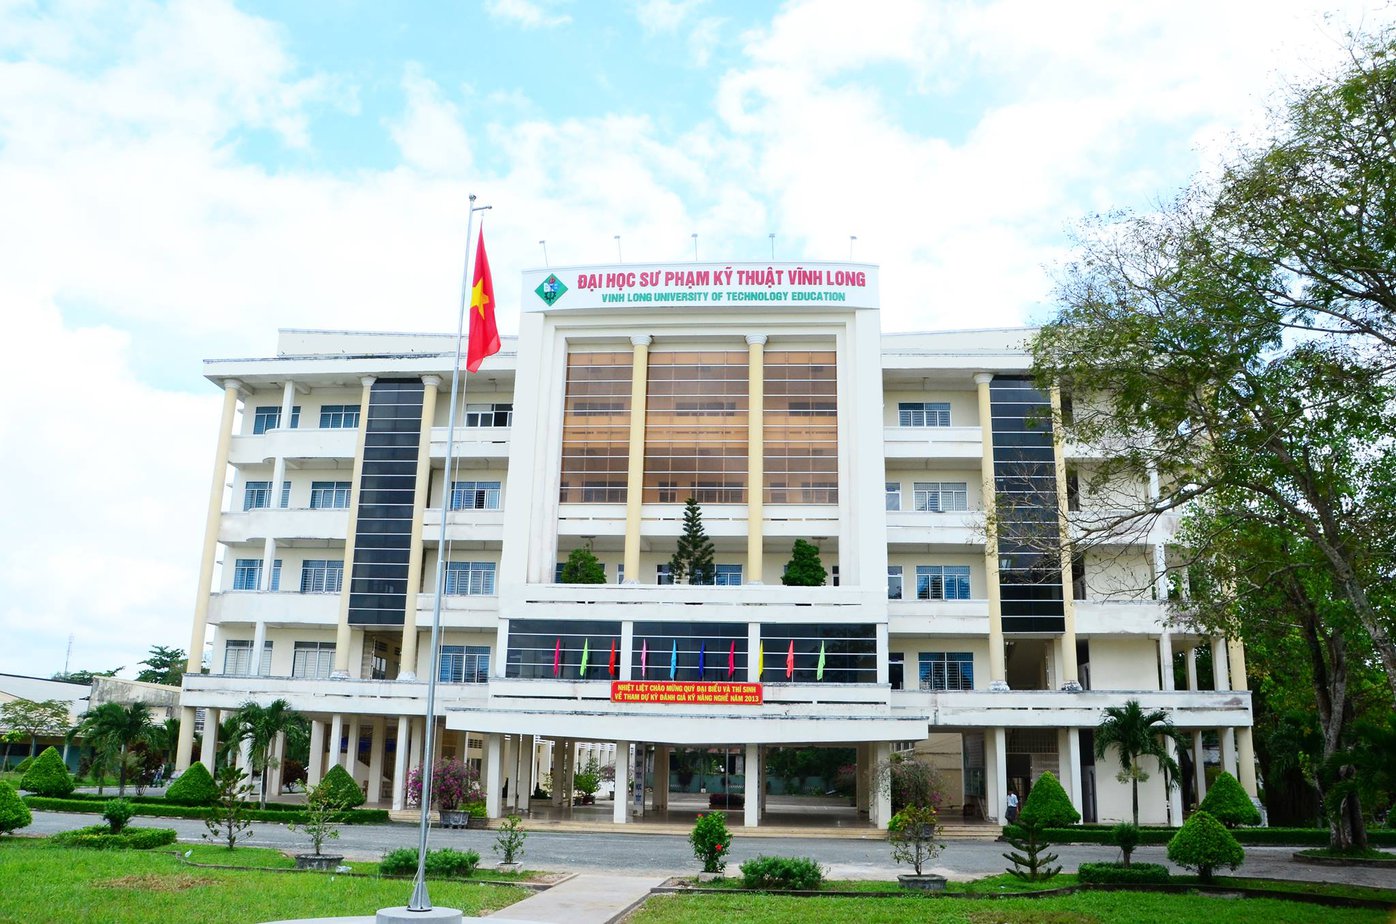 Vinh Long University of Technology and Education